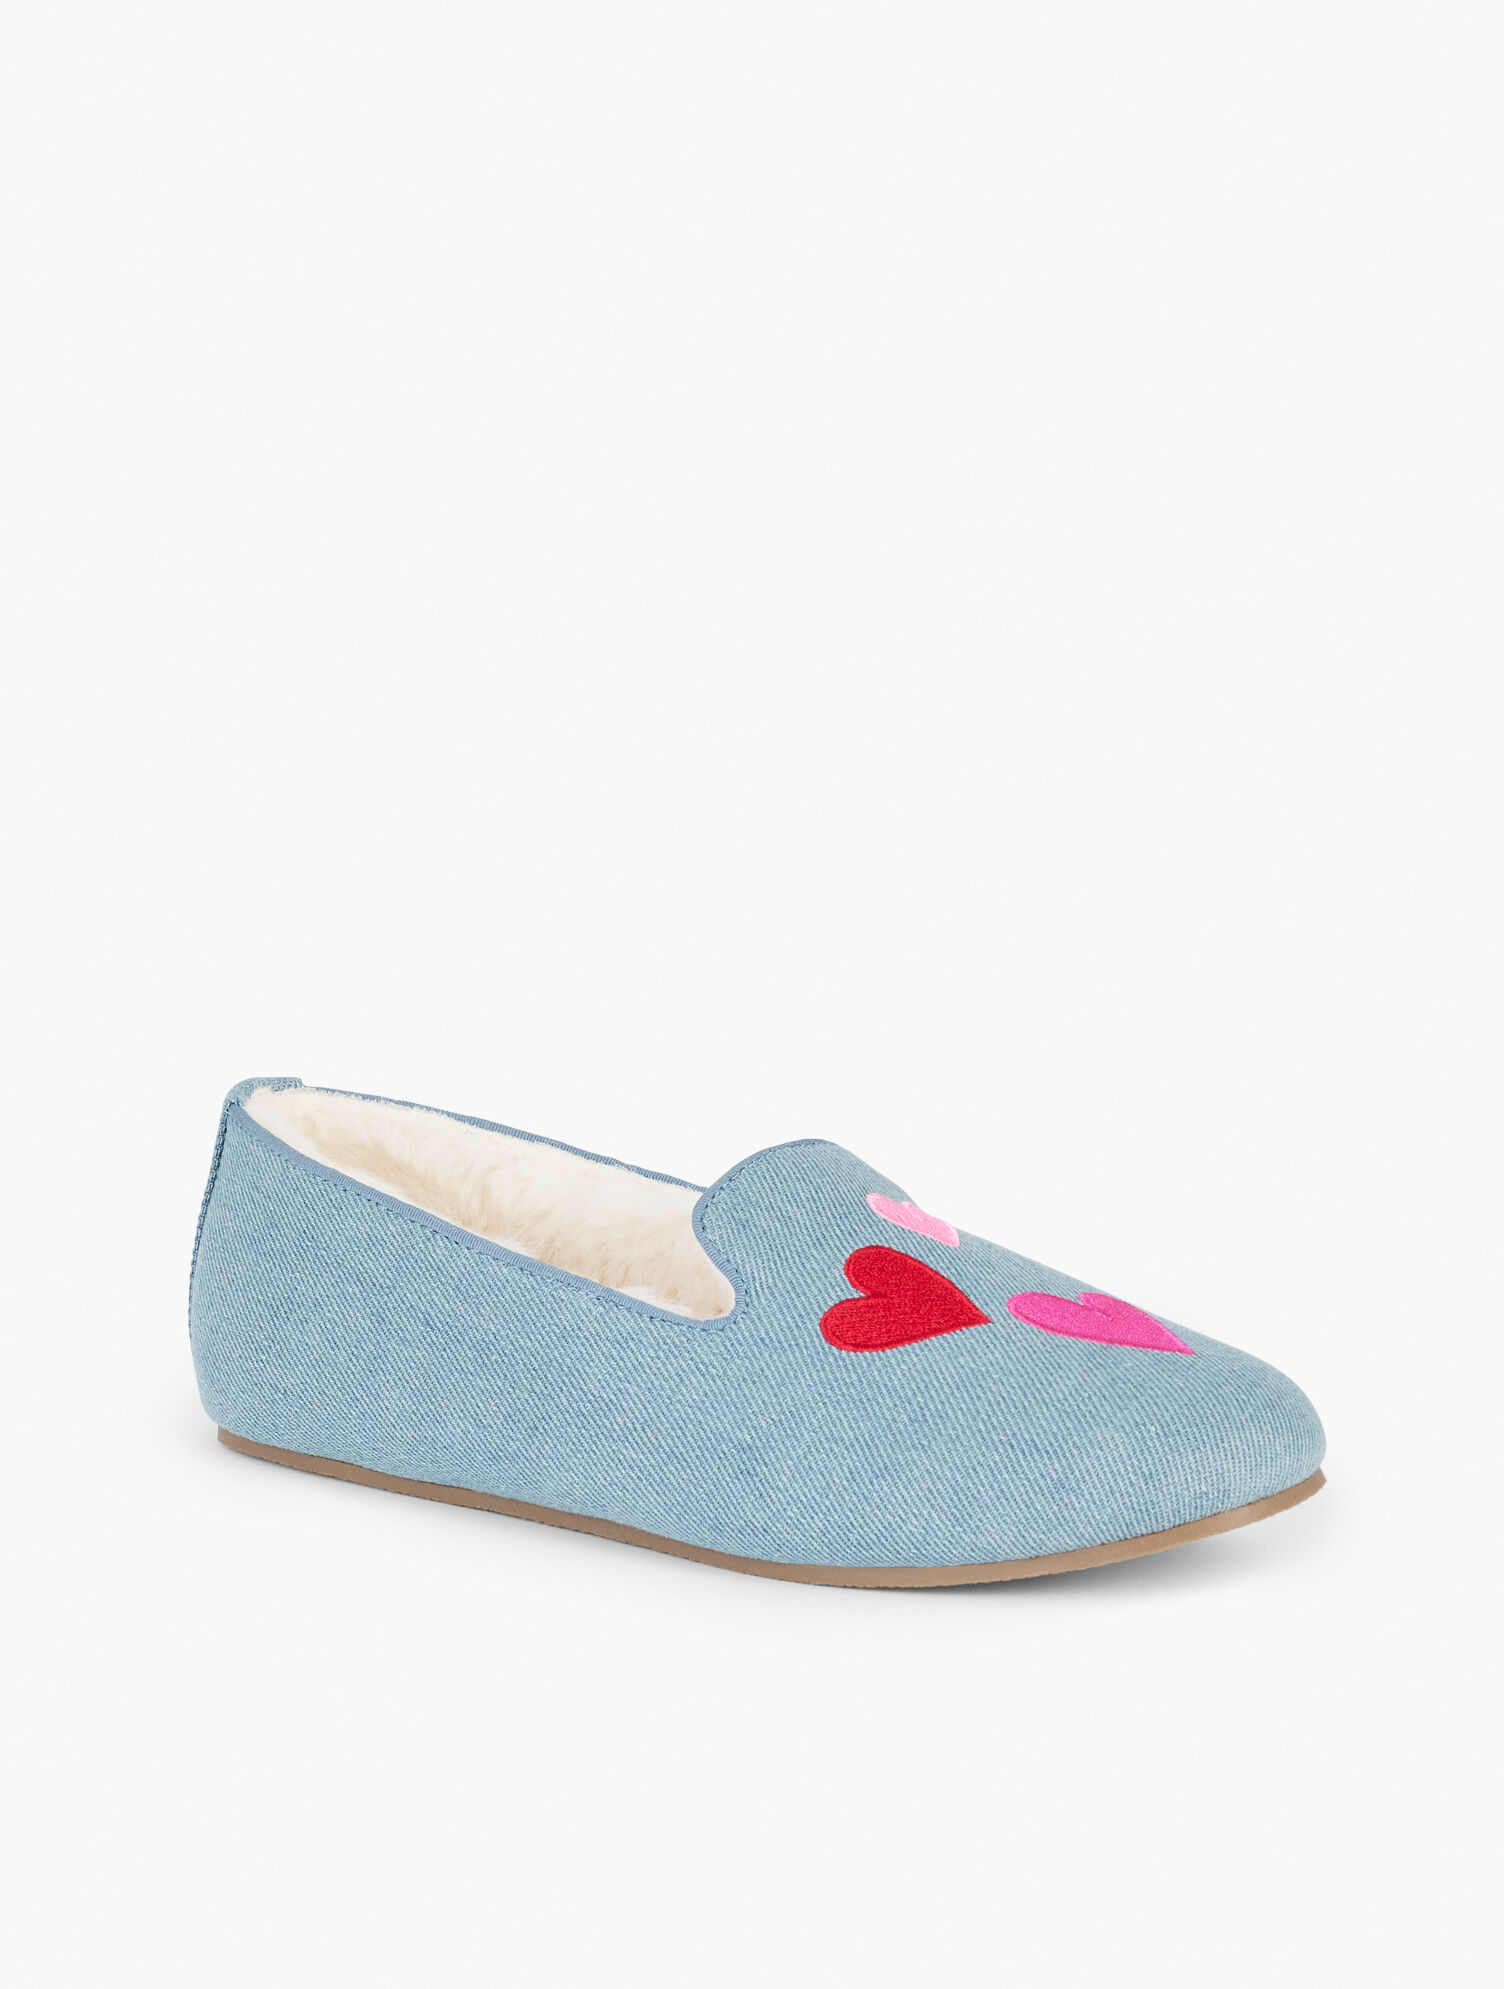 Embroidered Hearts Denim Slippers | Talbots